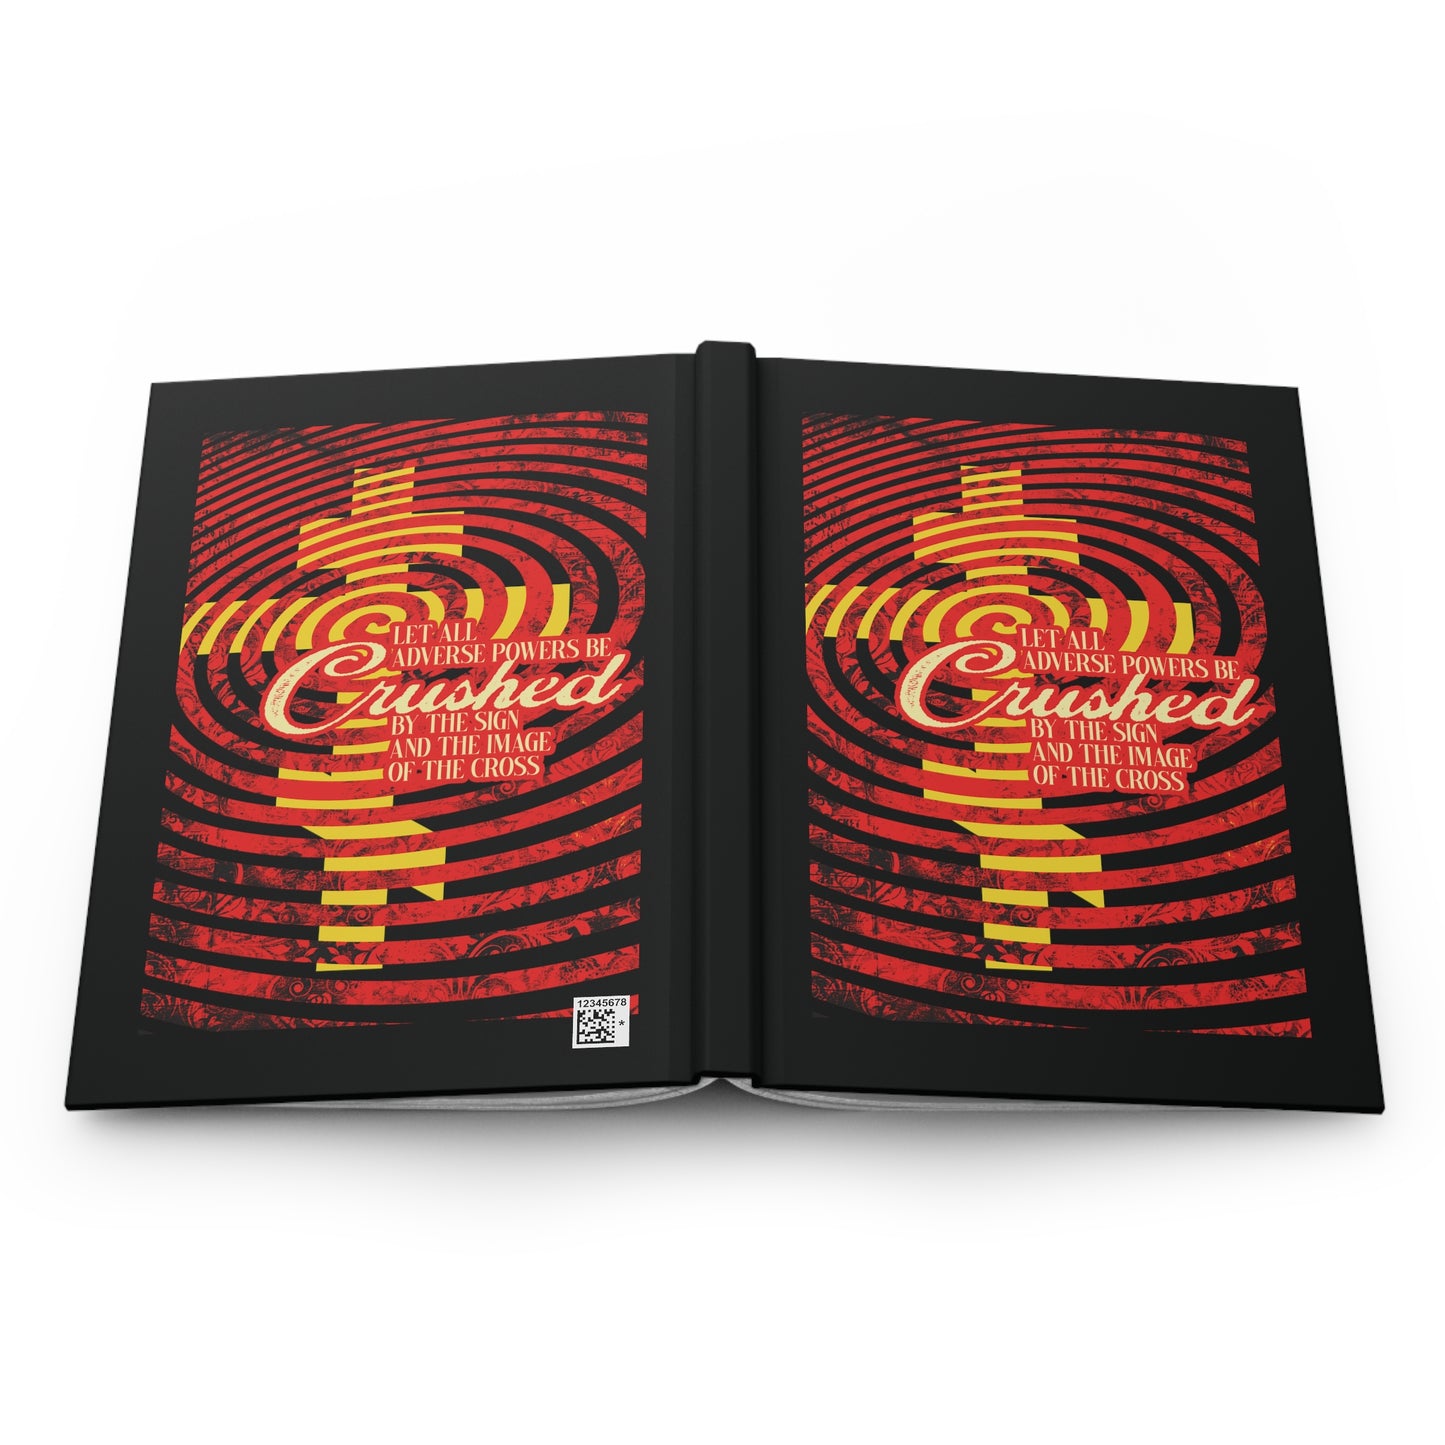 Let All Adverse Powers Be Crushed No. 2 | Orthodox Christian Accessory | Hardcover Journal